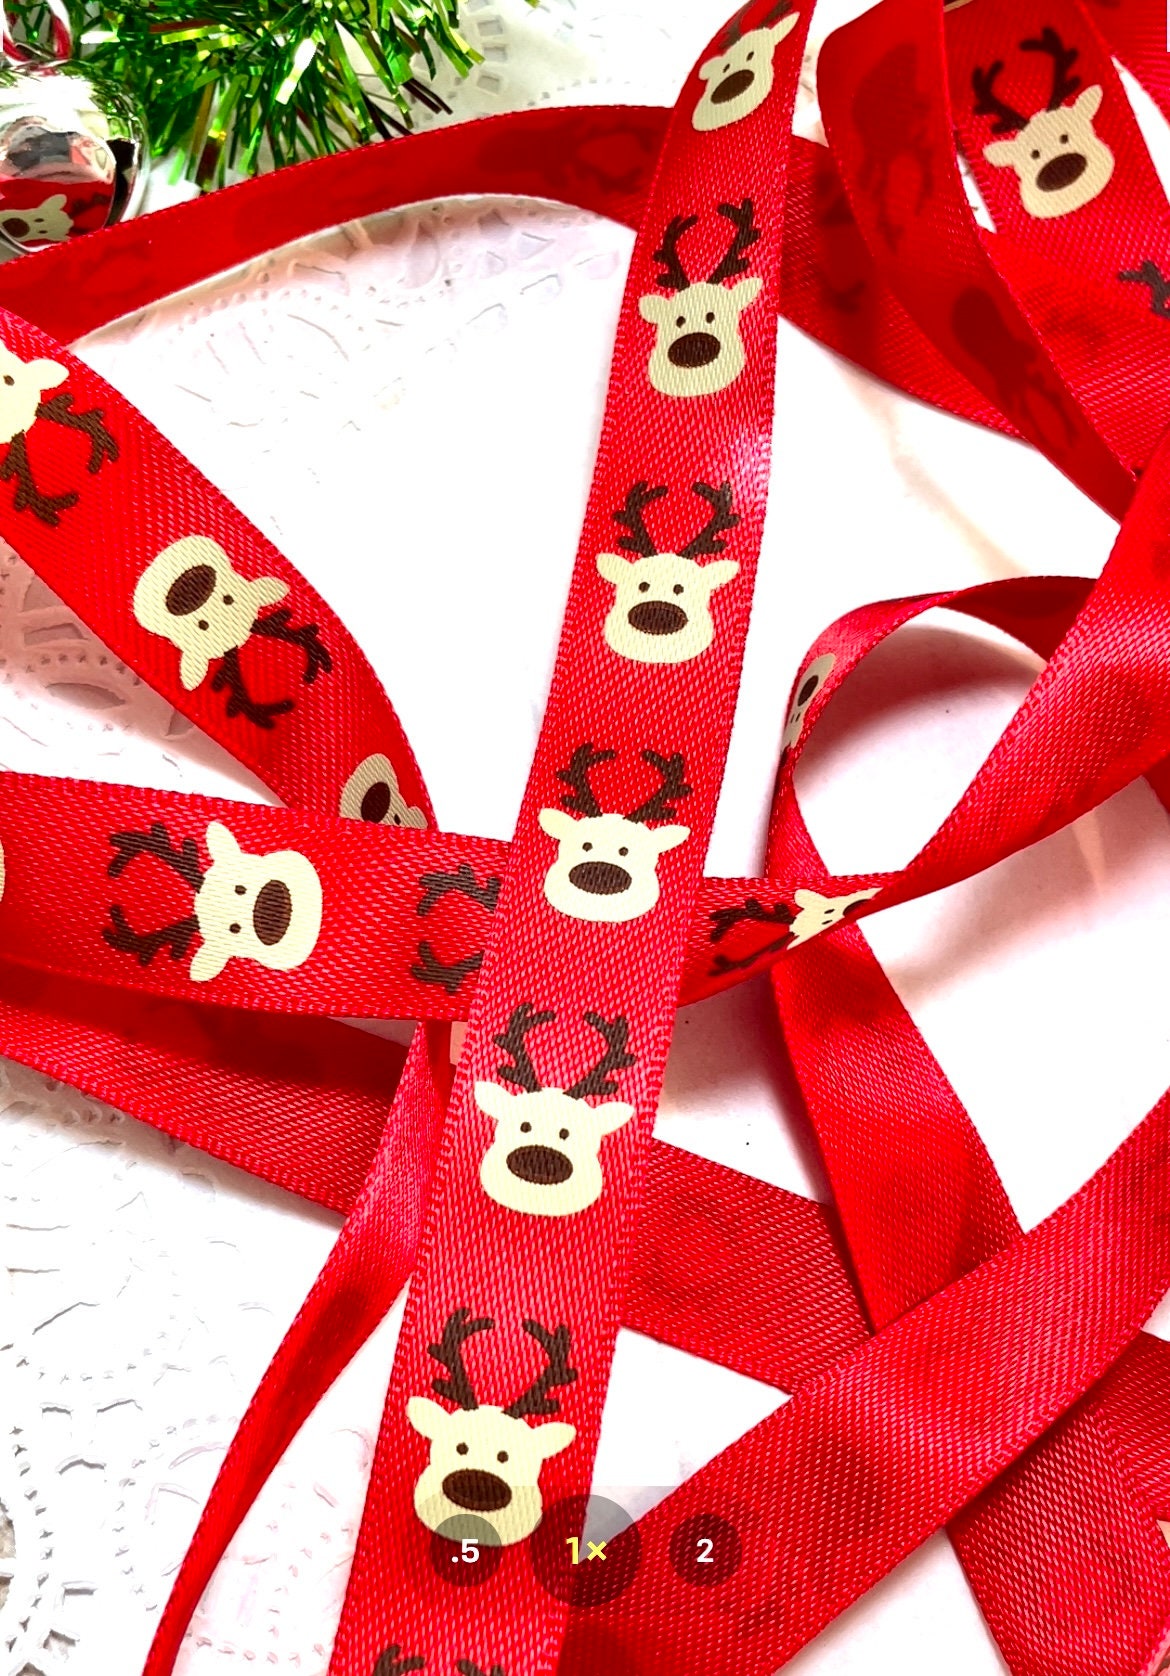 Christmas Wreath Bows Whimsical Christmas Decorations. Red and